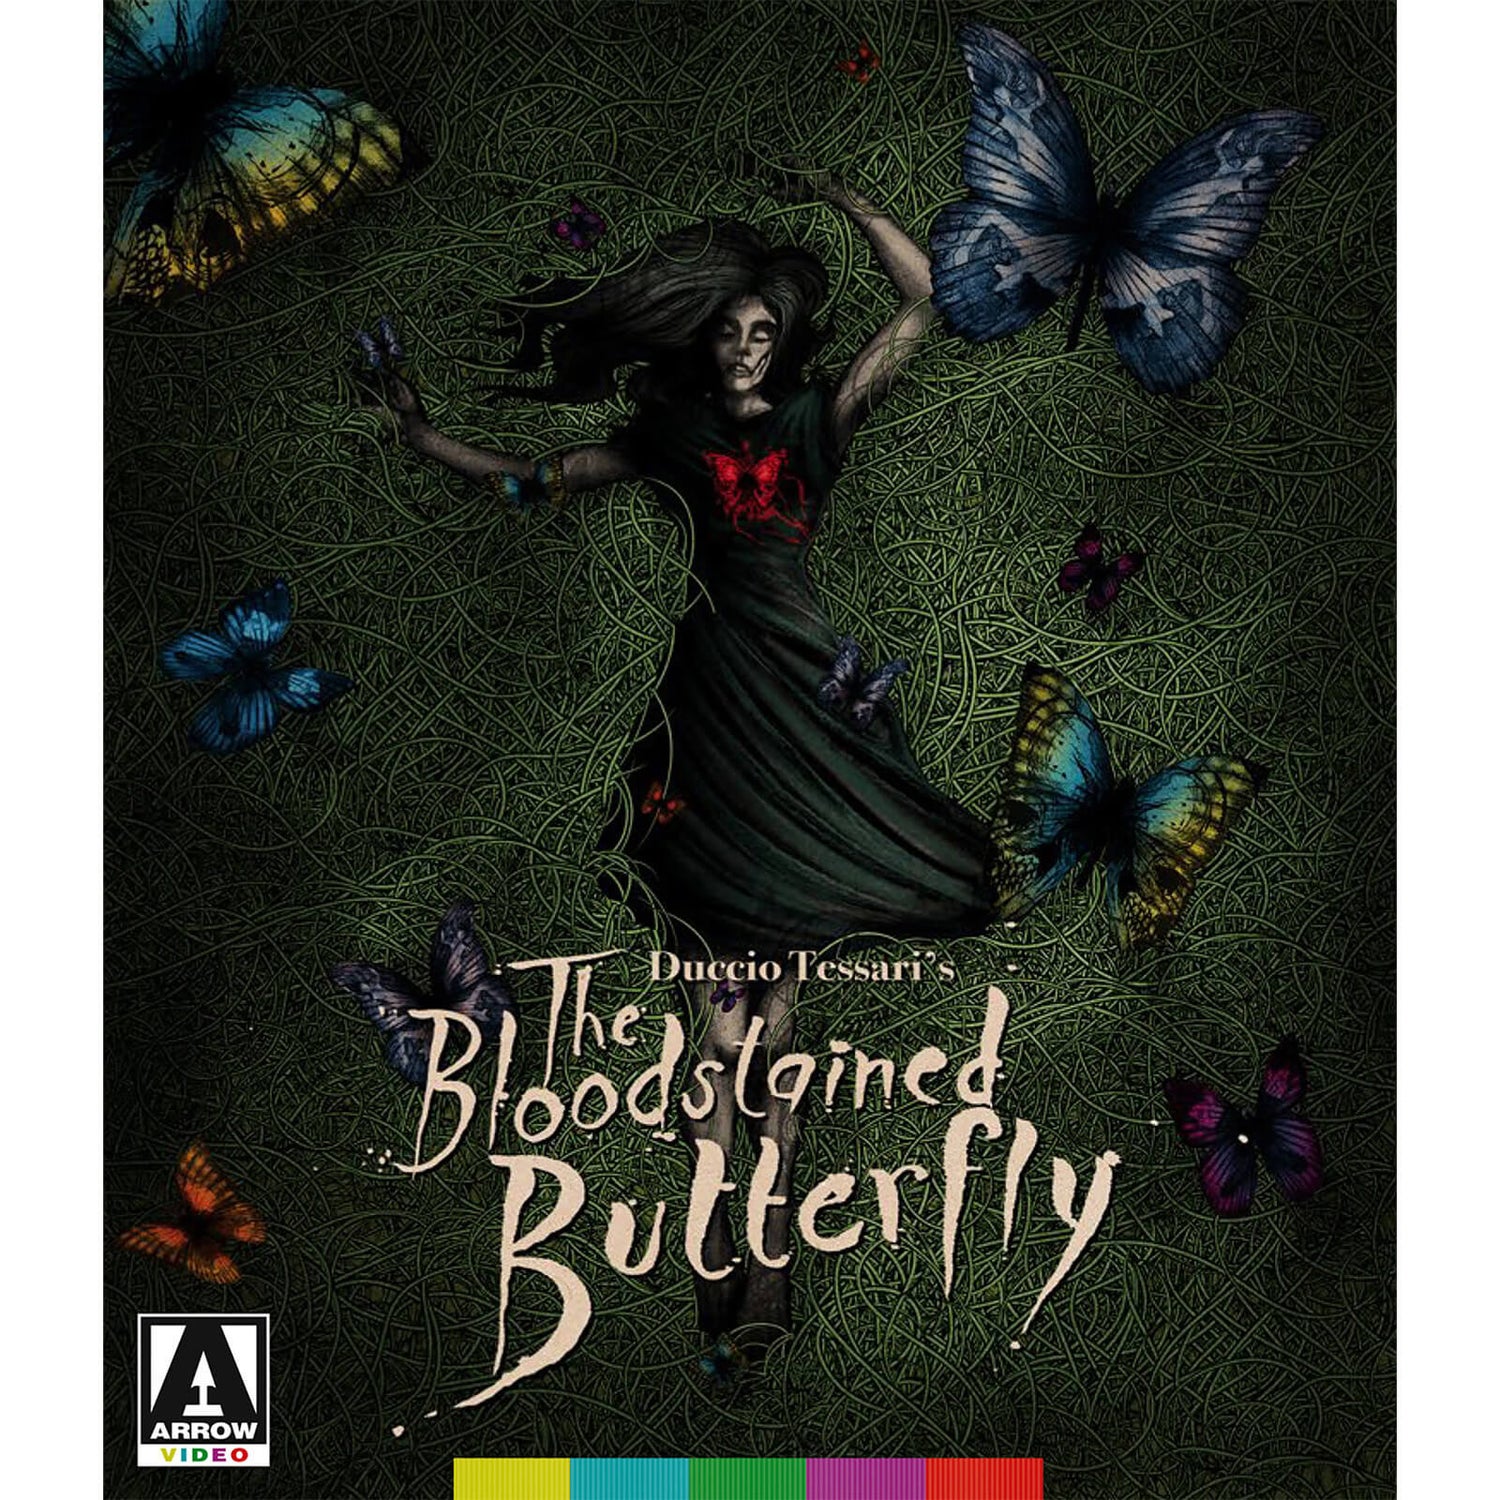 The Bloodstained Butterfly Blu-ray+DVD